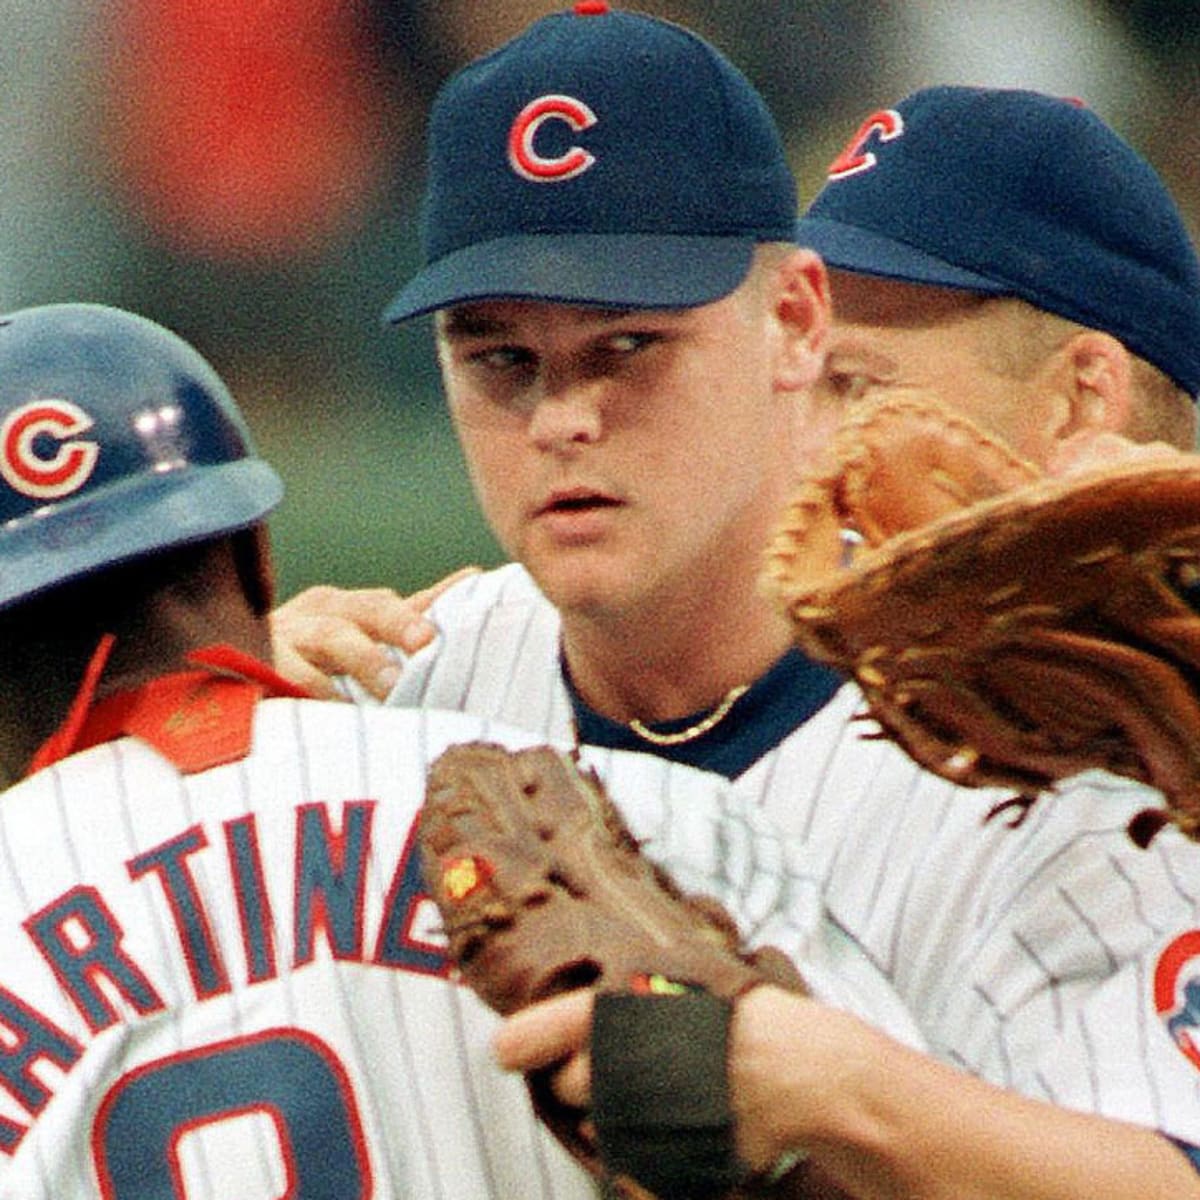 22 Years Ago Today: Kerry Wood's 20K Game Was the Best 20K Game